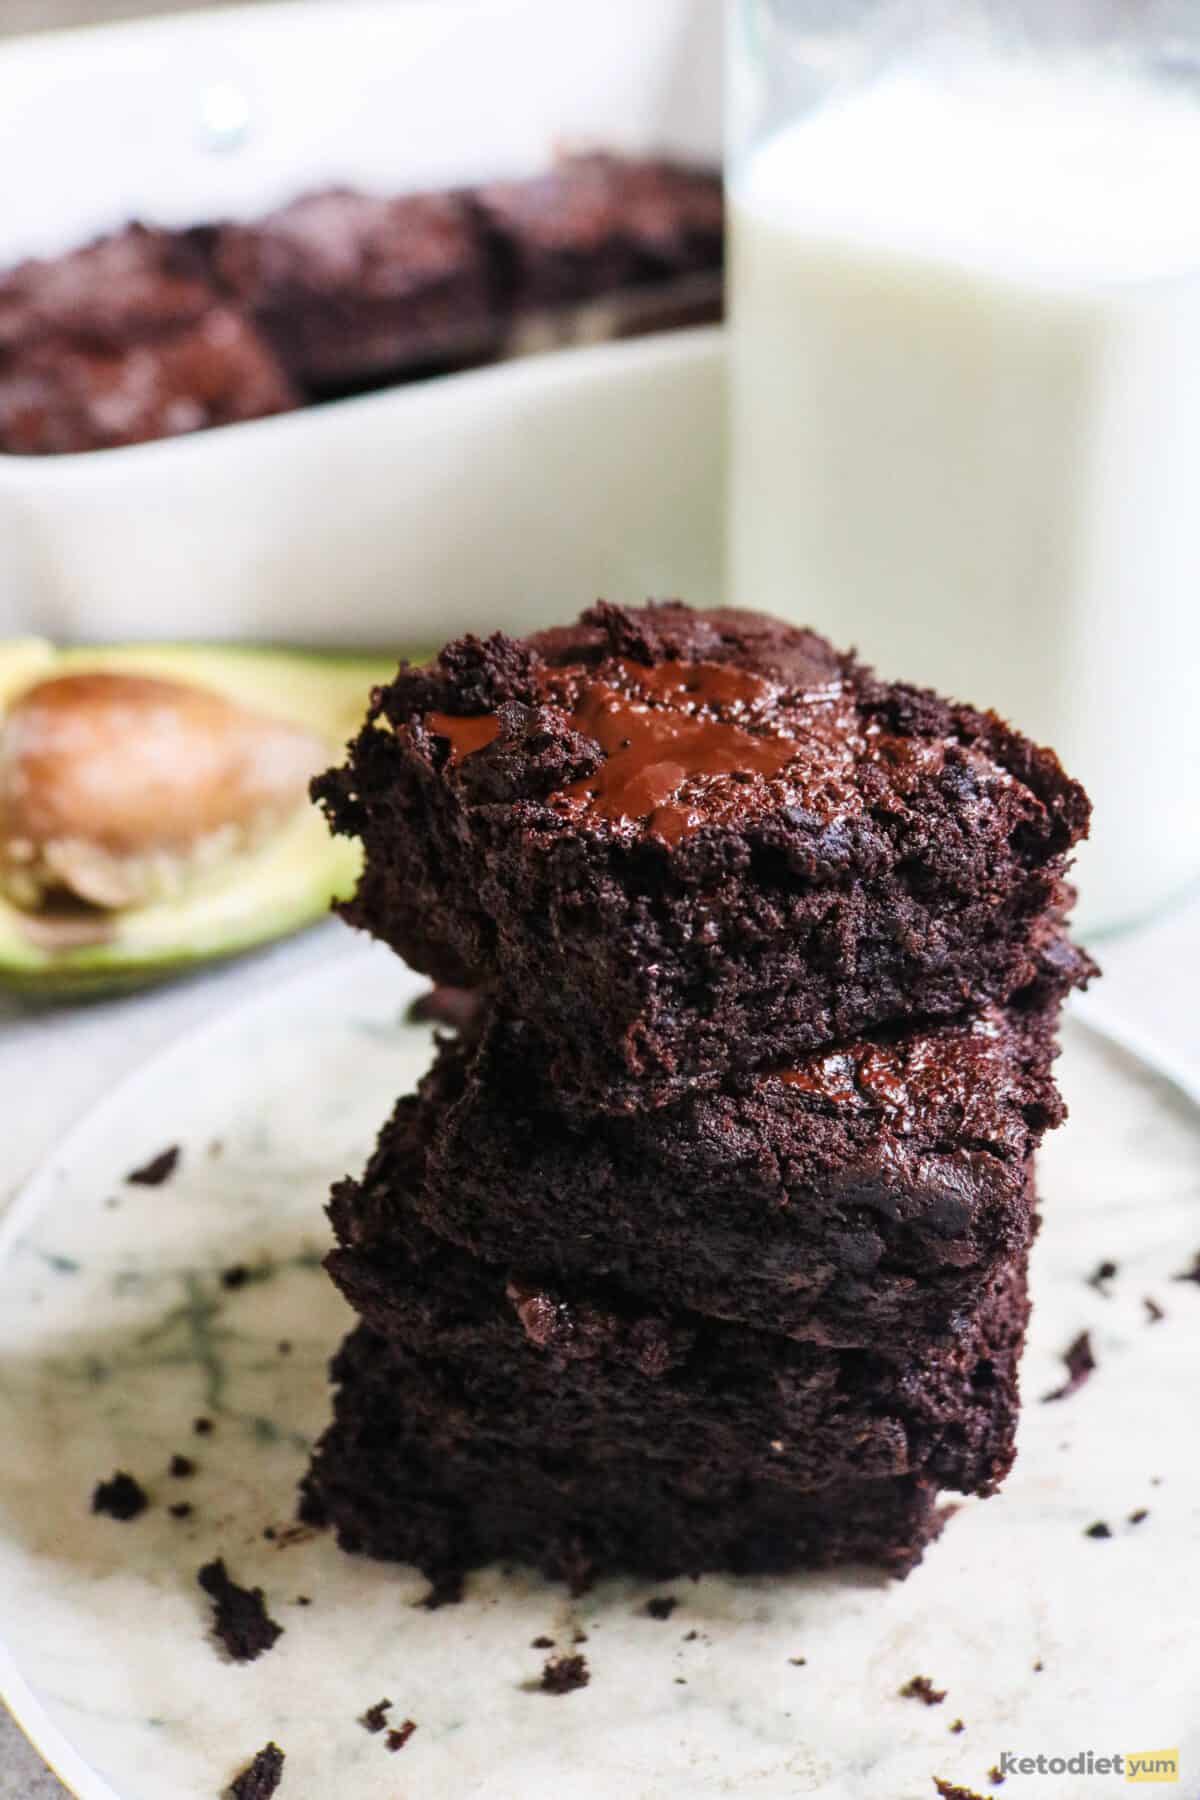 Stack of 3 avocado brownies on a plate with half an avocado, a glass of milk and a baking pan with more brownie in the background